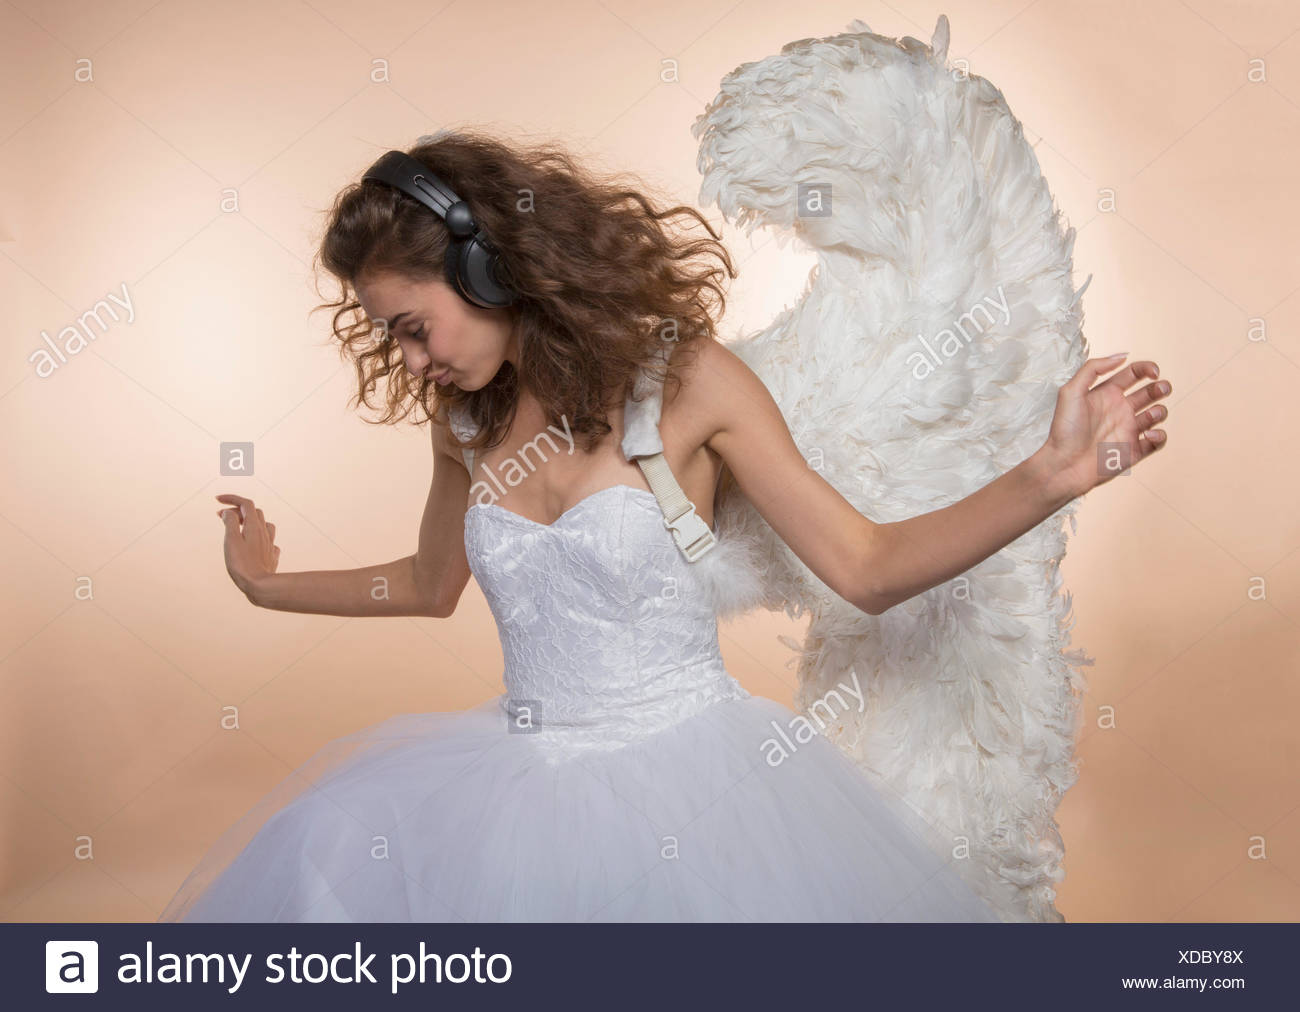 Bride In Angel Wings Dancing While Listening Music Against Colored Background Stock Photo Alamy